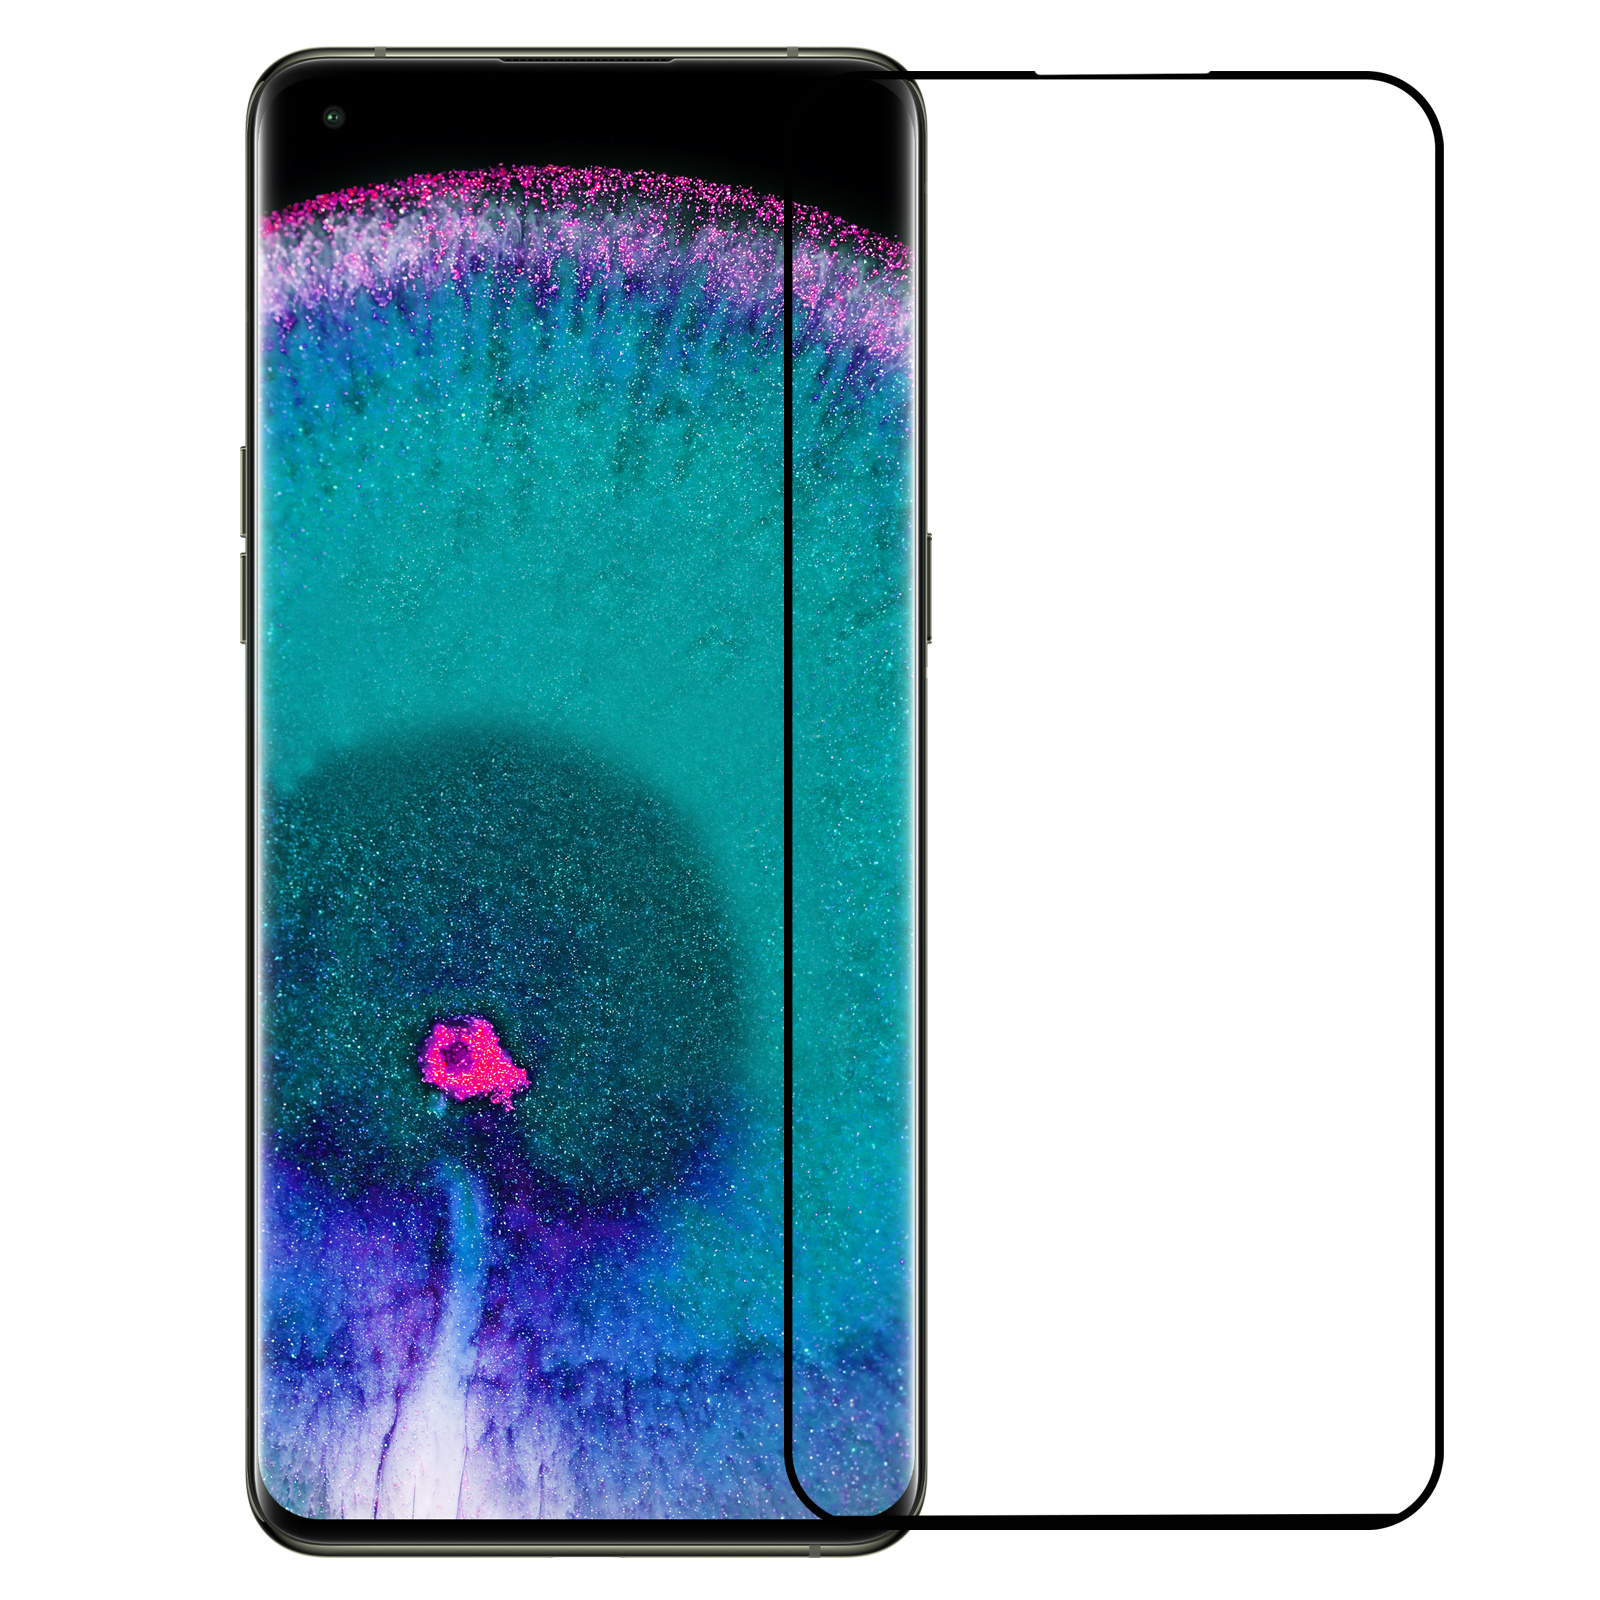 Nomfy OPPO Find X5 Pro Hoesje Siliconen Case Back Cover Met 2x Screenprotector - OPPO Find X5 Pro Hoes Cover Silicone - Transparant